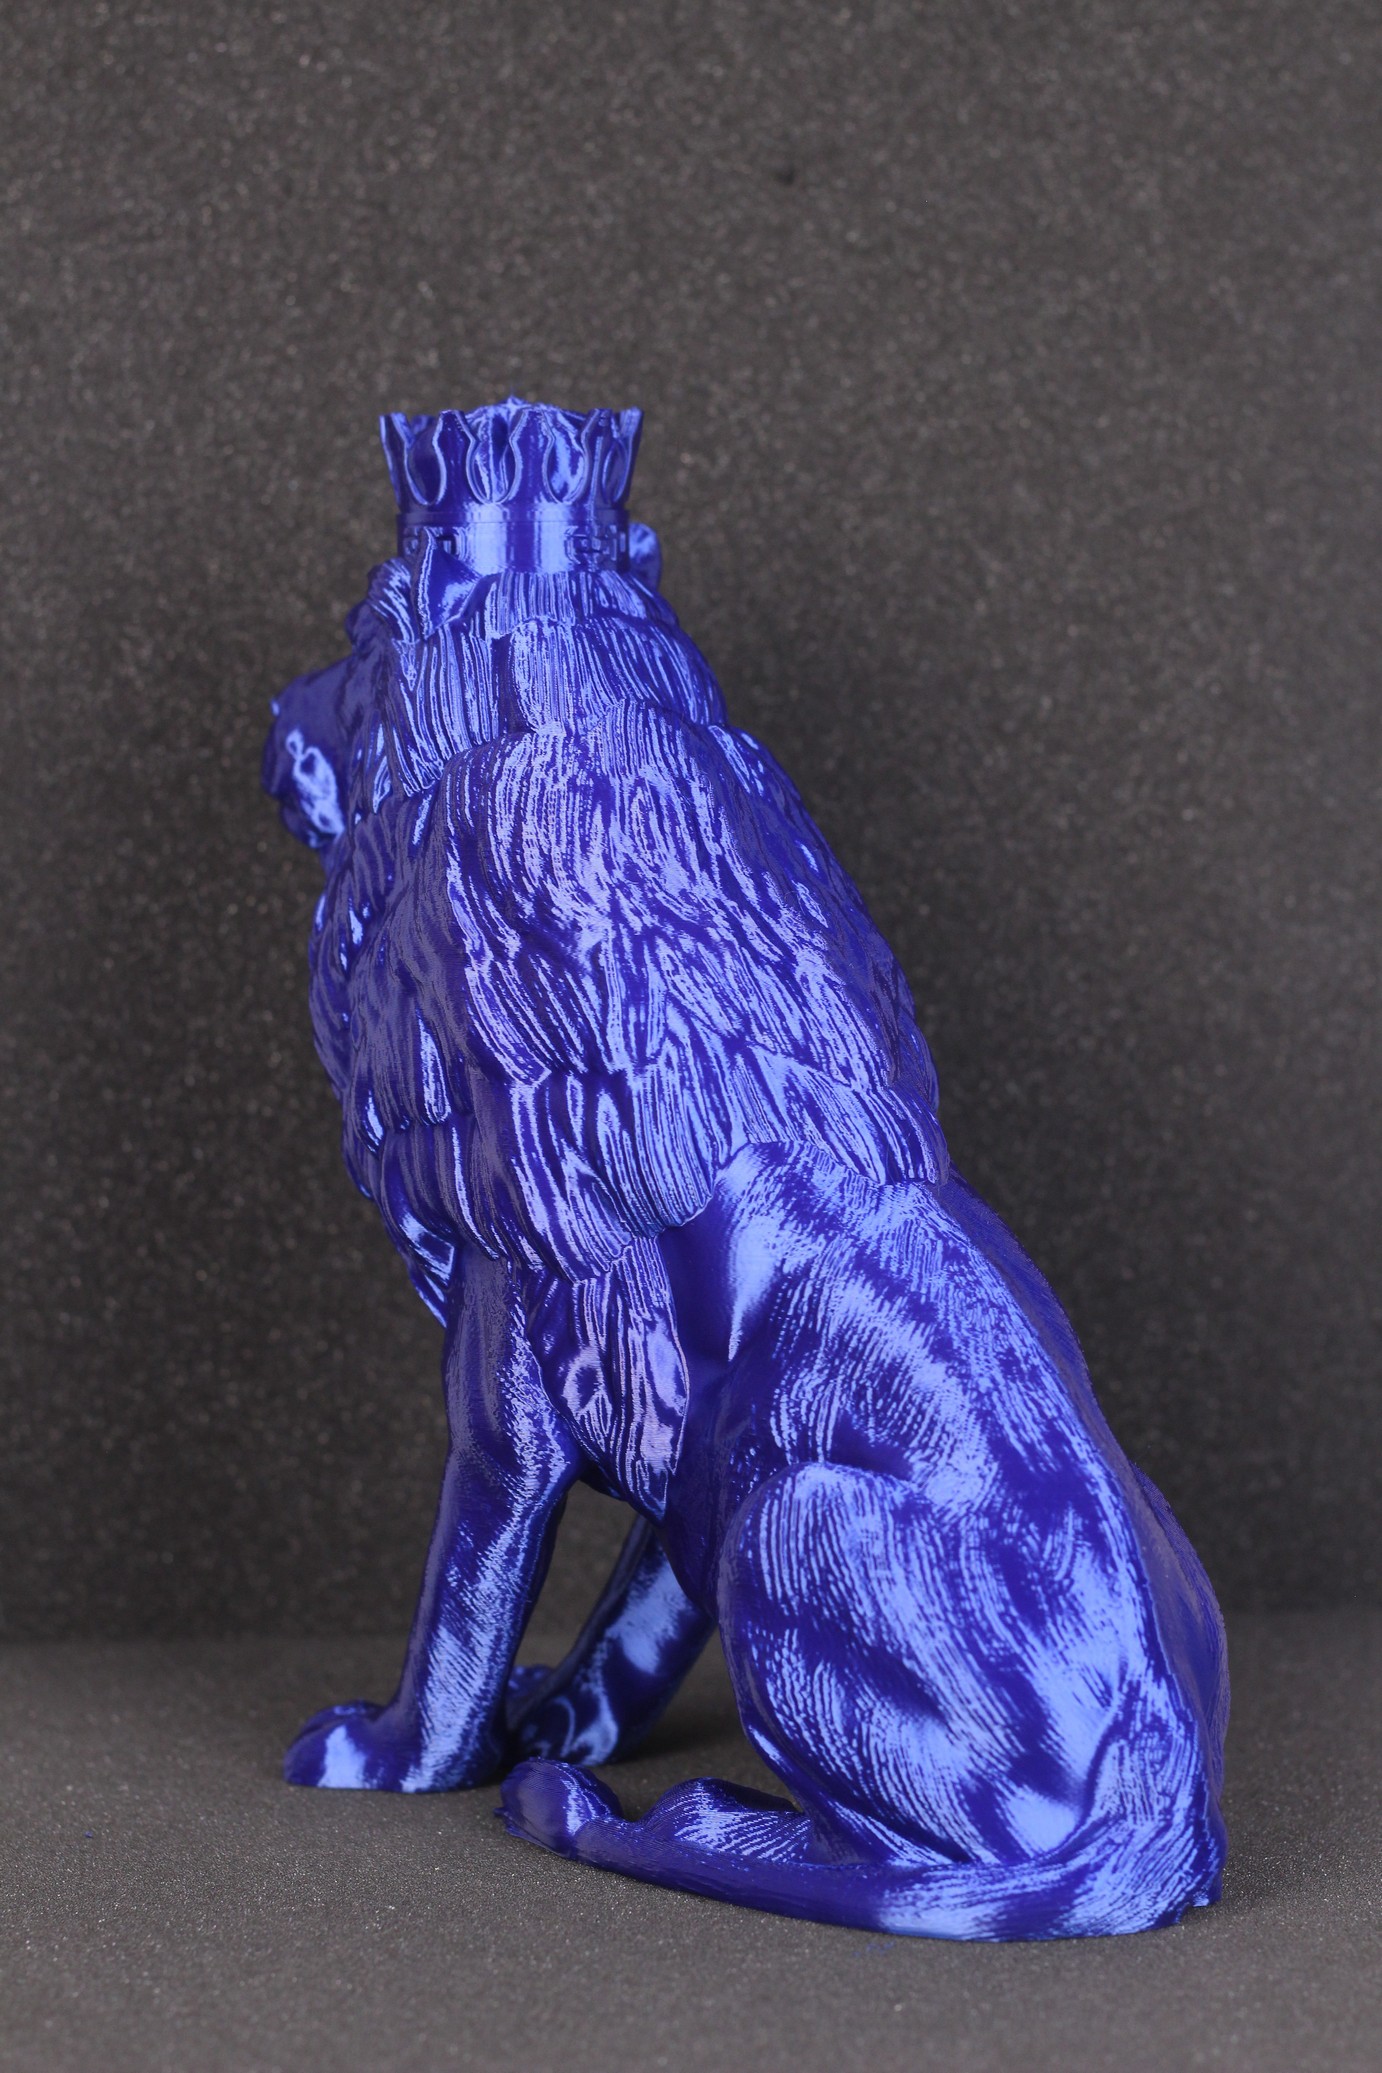 King Roary printed on Ender 3 S1 4 | Creality Ender 3 S1 Review: Almost Perfect